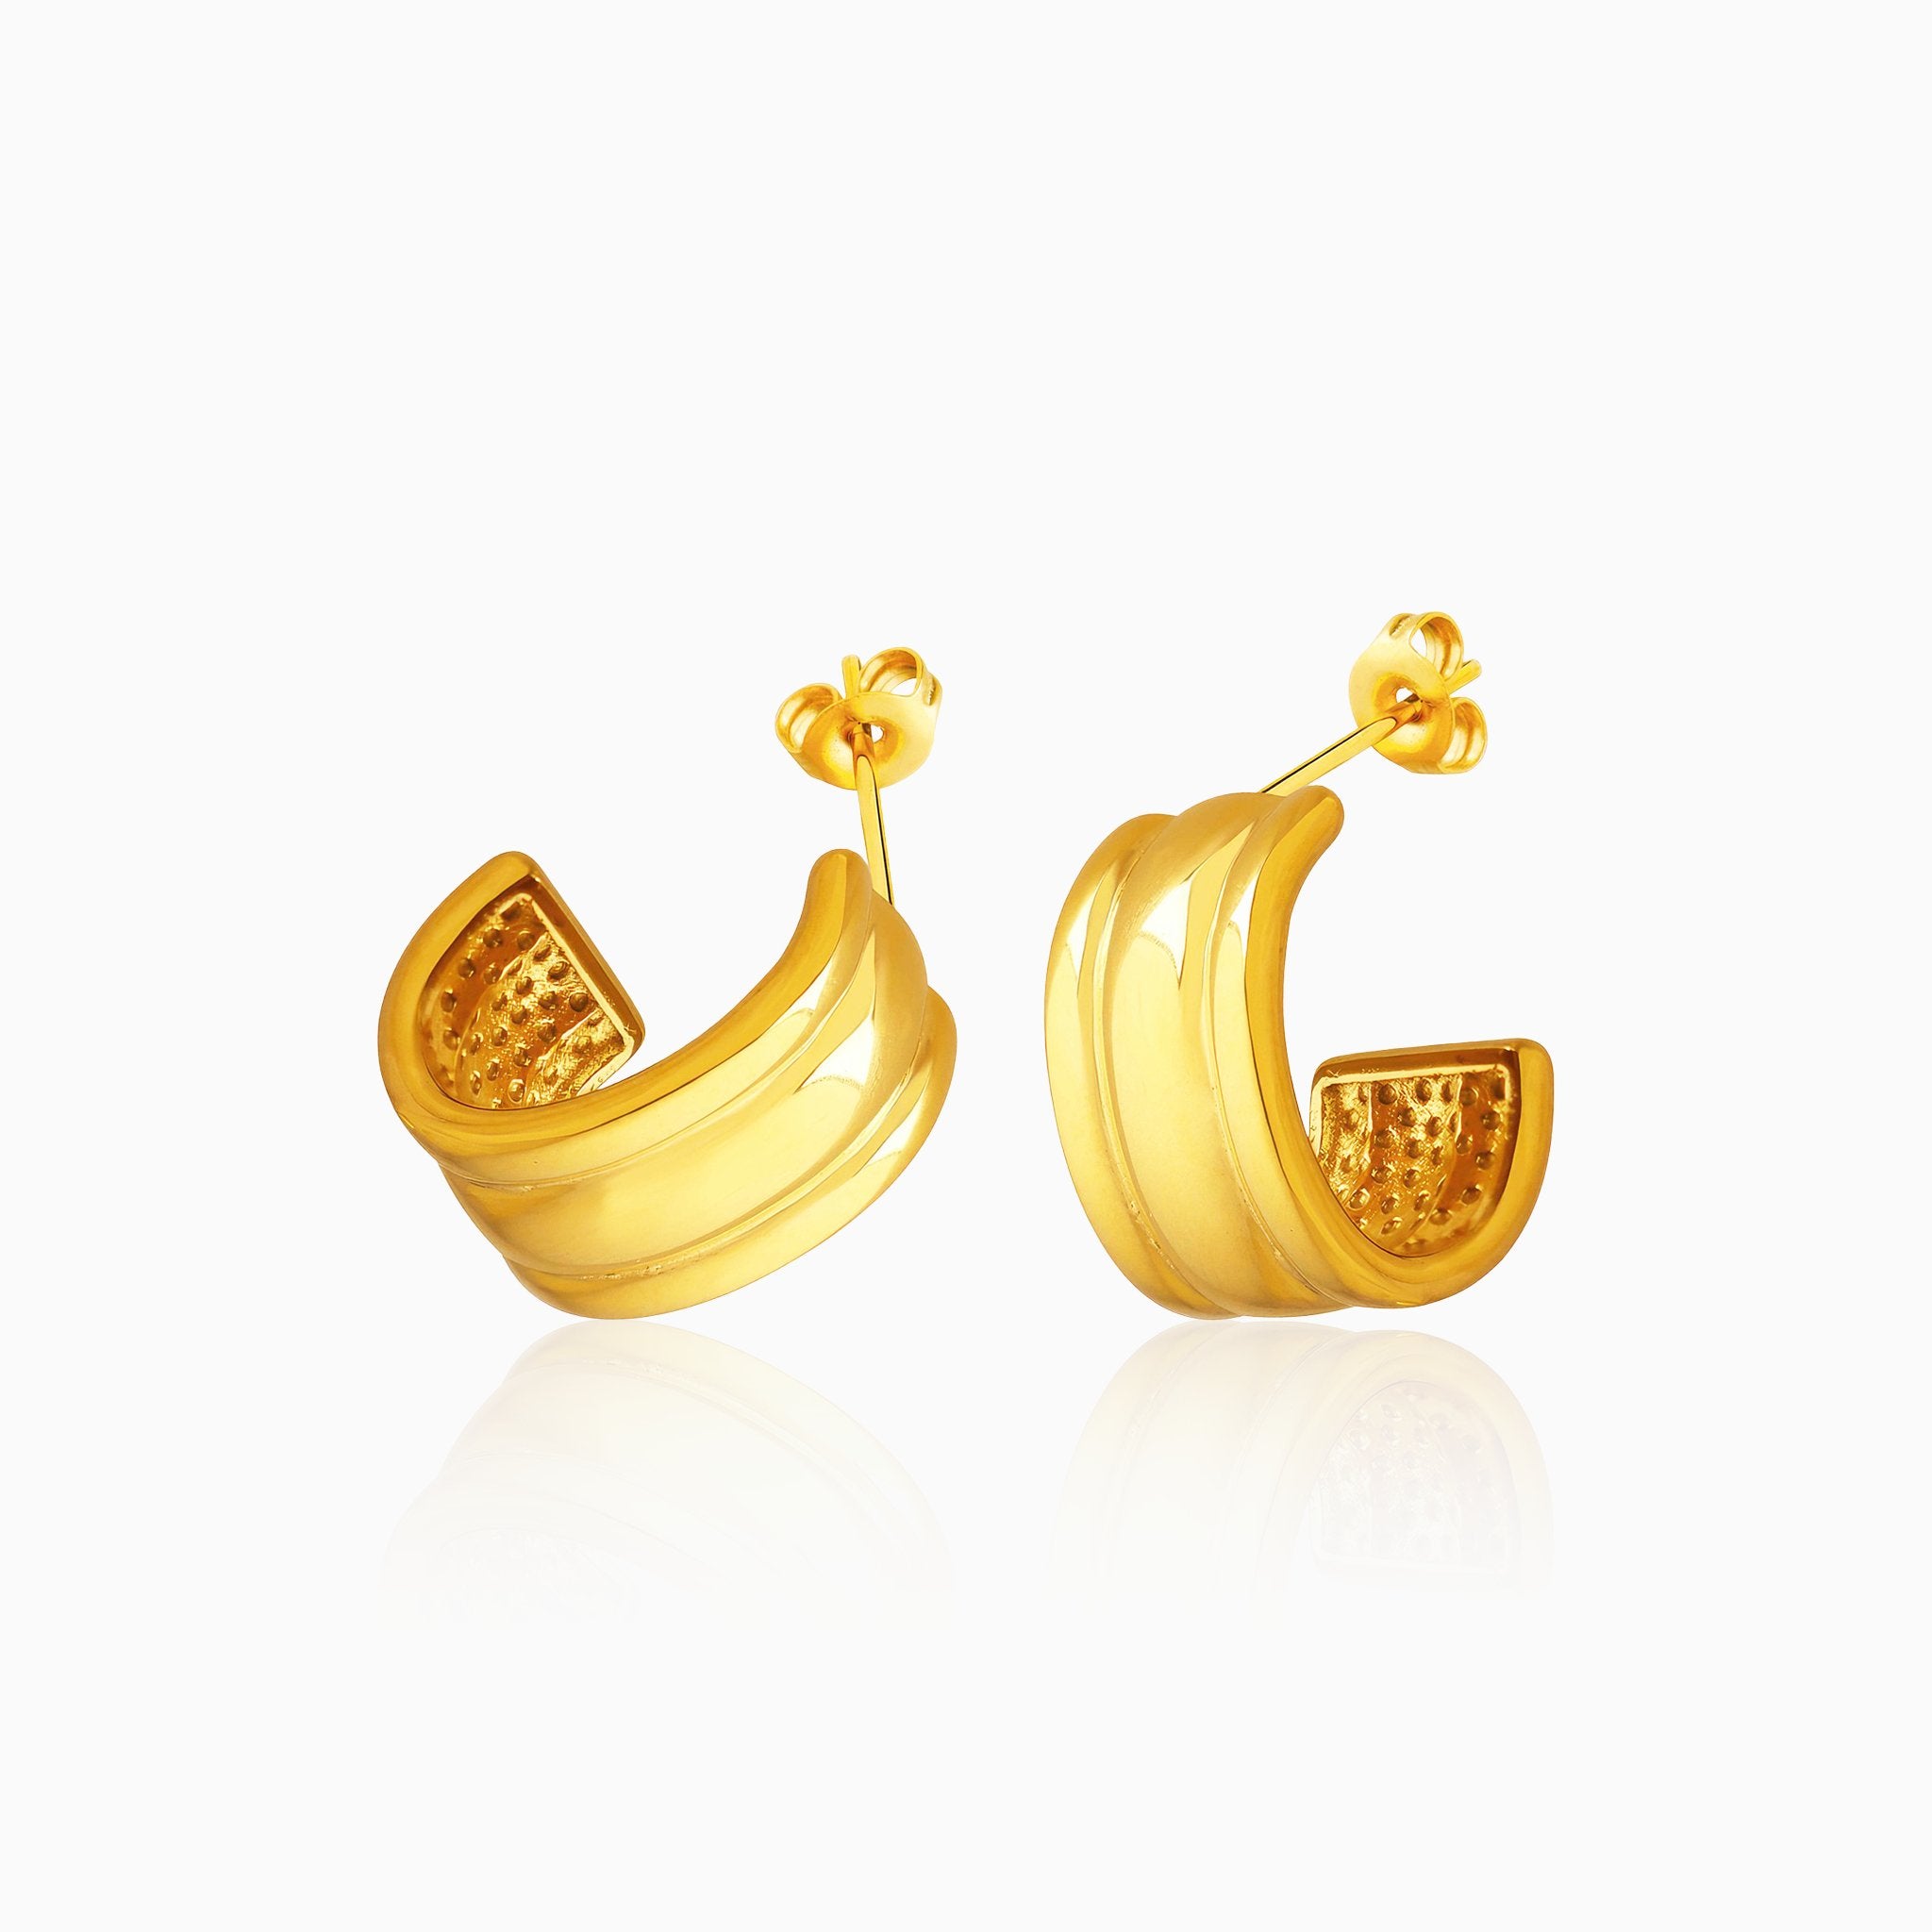 C-Shaped Embossed Minimalist Earrings - Nobbier - Earring - 18K Gold And Titanium PVD Coated Jewelry